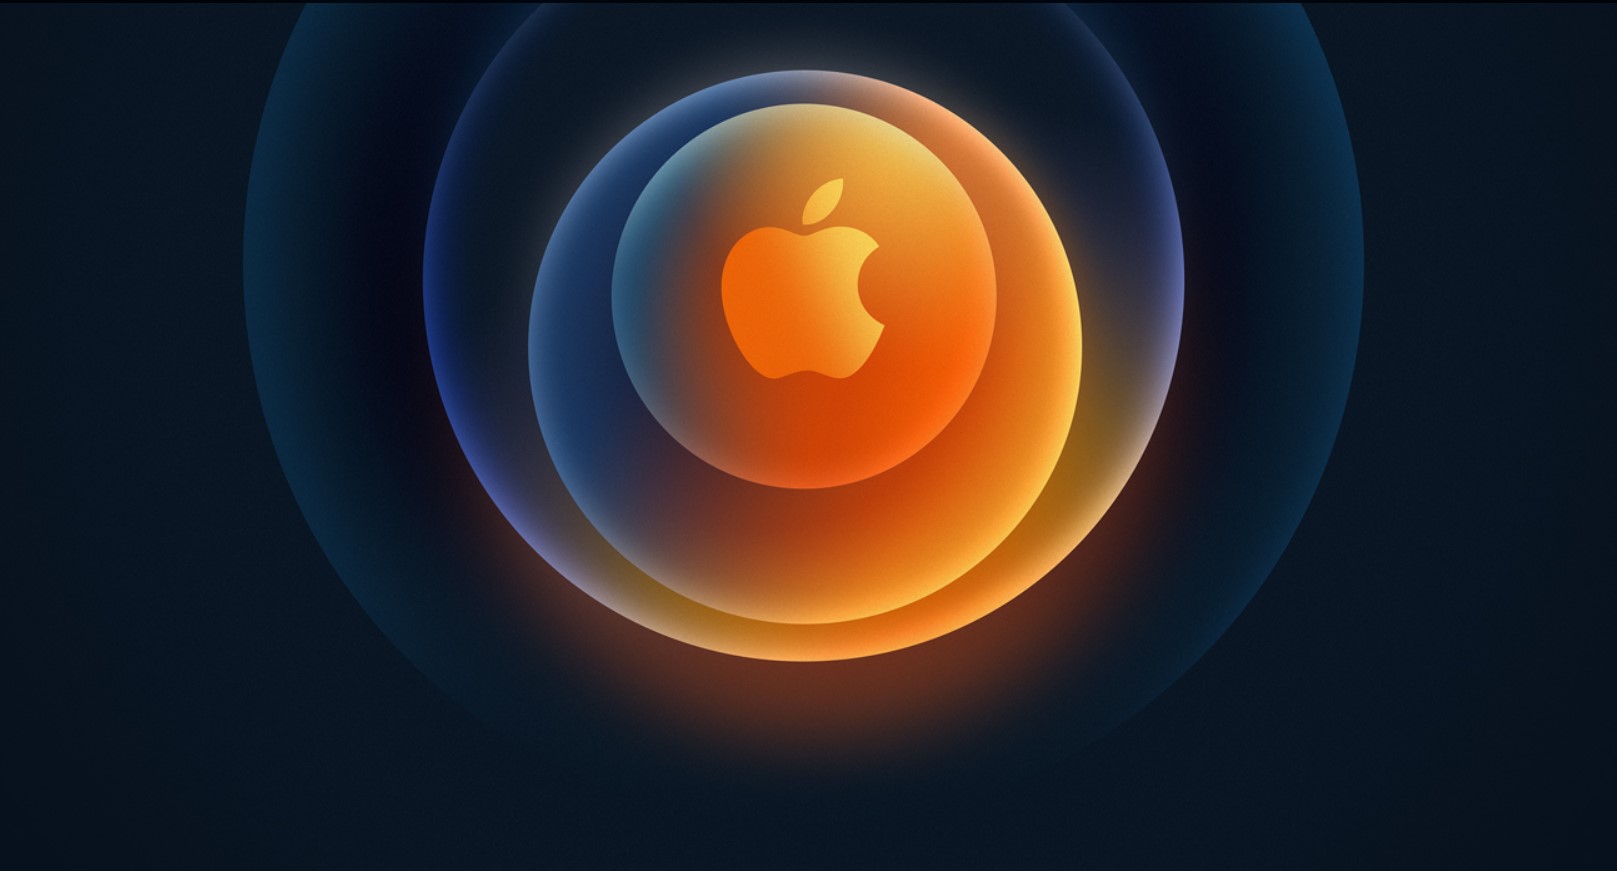 Apple iPhone 12 wallpapers and Apple Event 2020 wallpapers